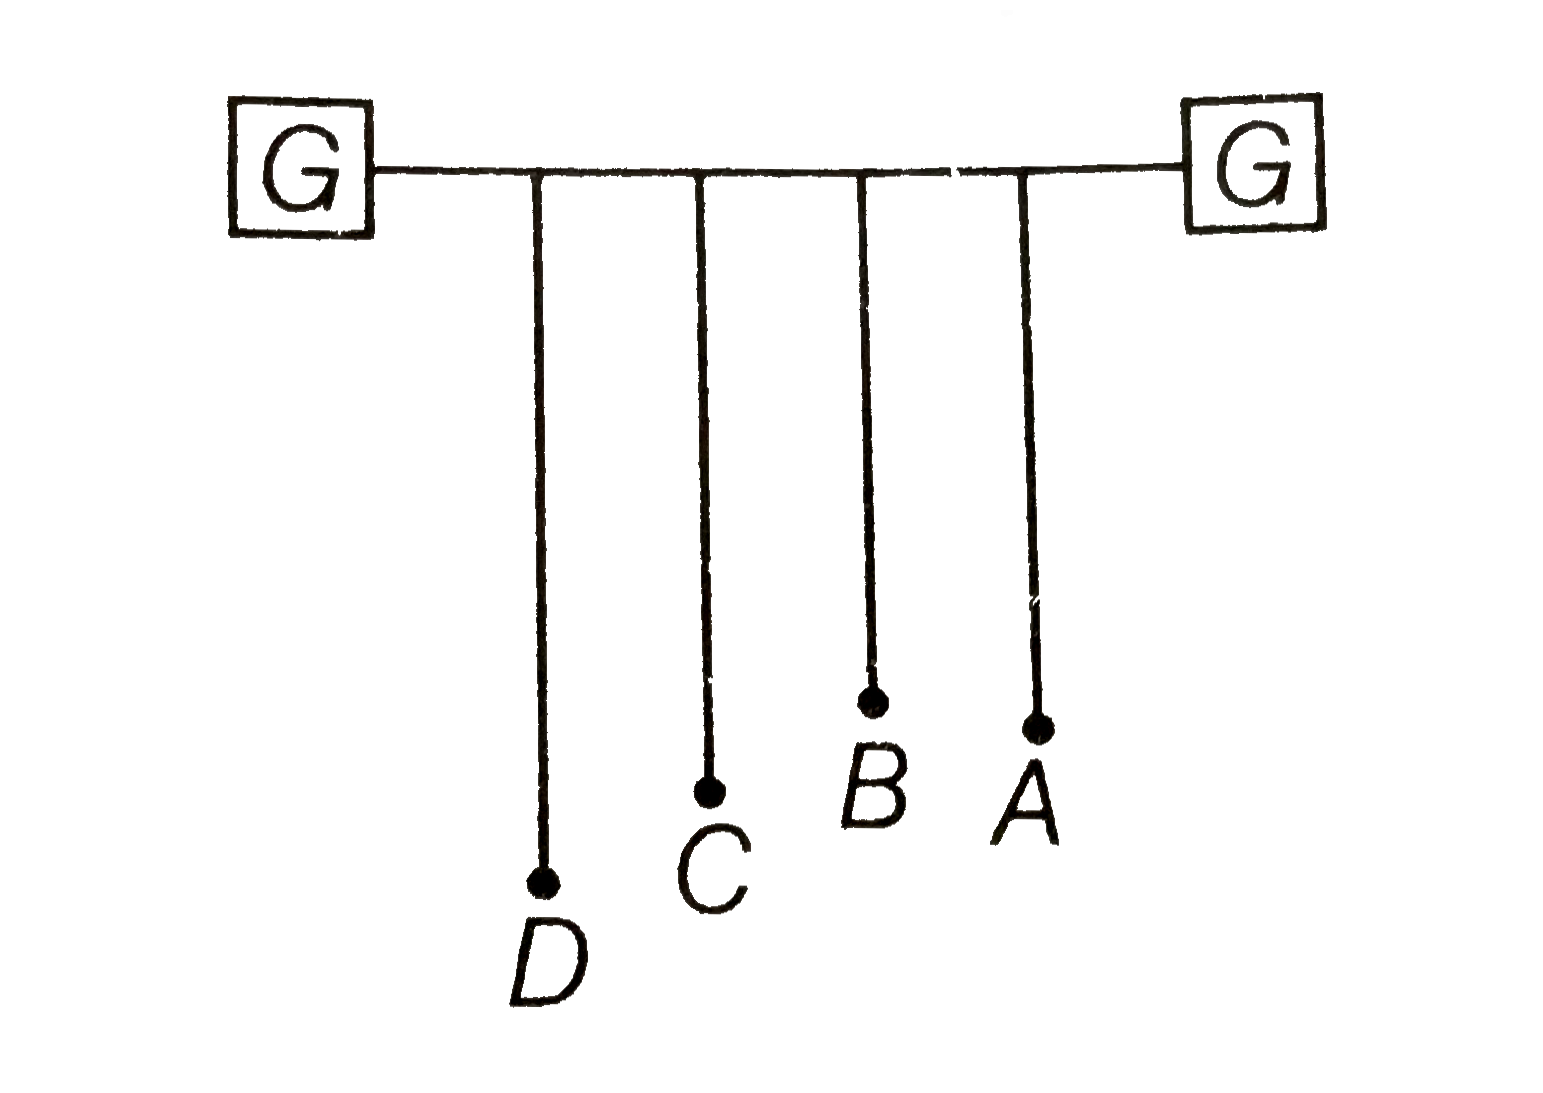 Four pendulums A, B, C and D are suspended from the same       elastic support as shown in figure. A and C are of the same length, while B is smaller than A and D is larger than A. If A is given a transverse displacement,